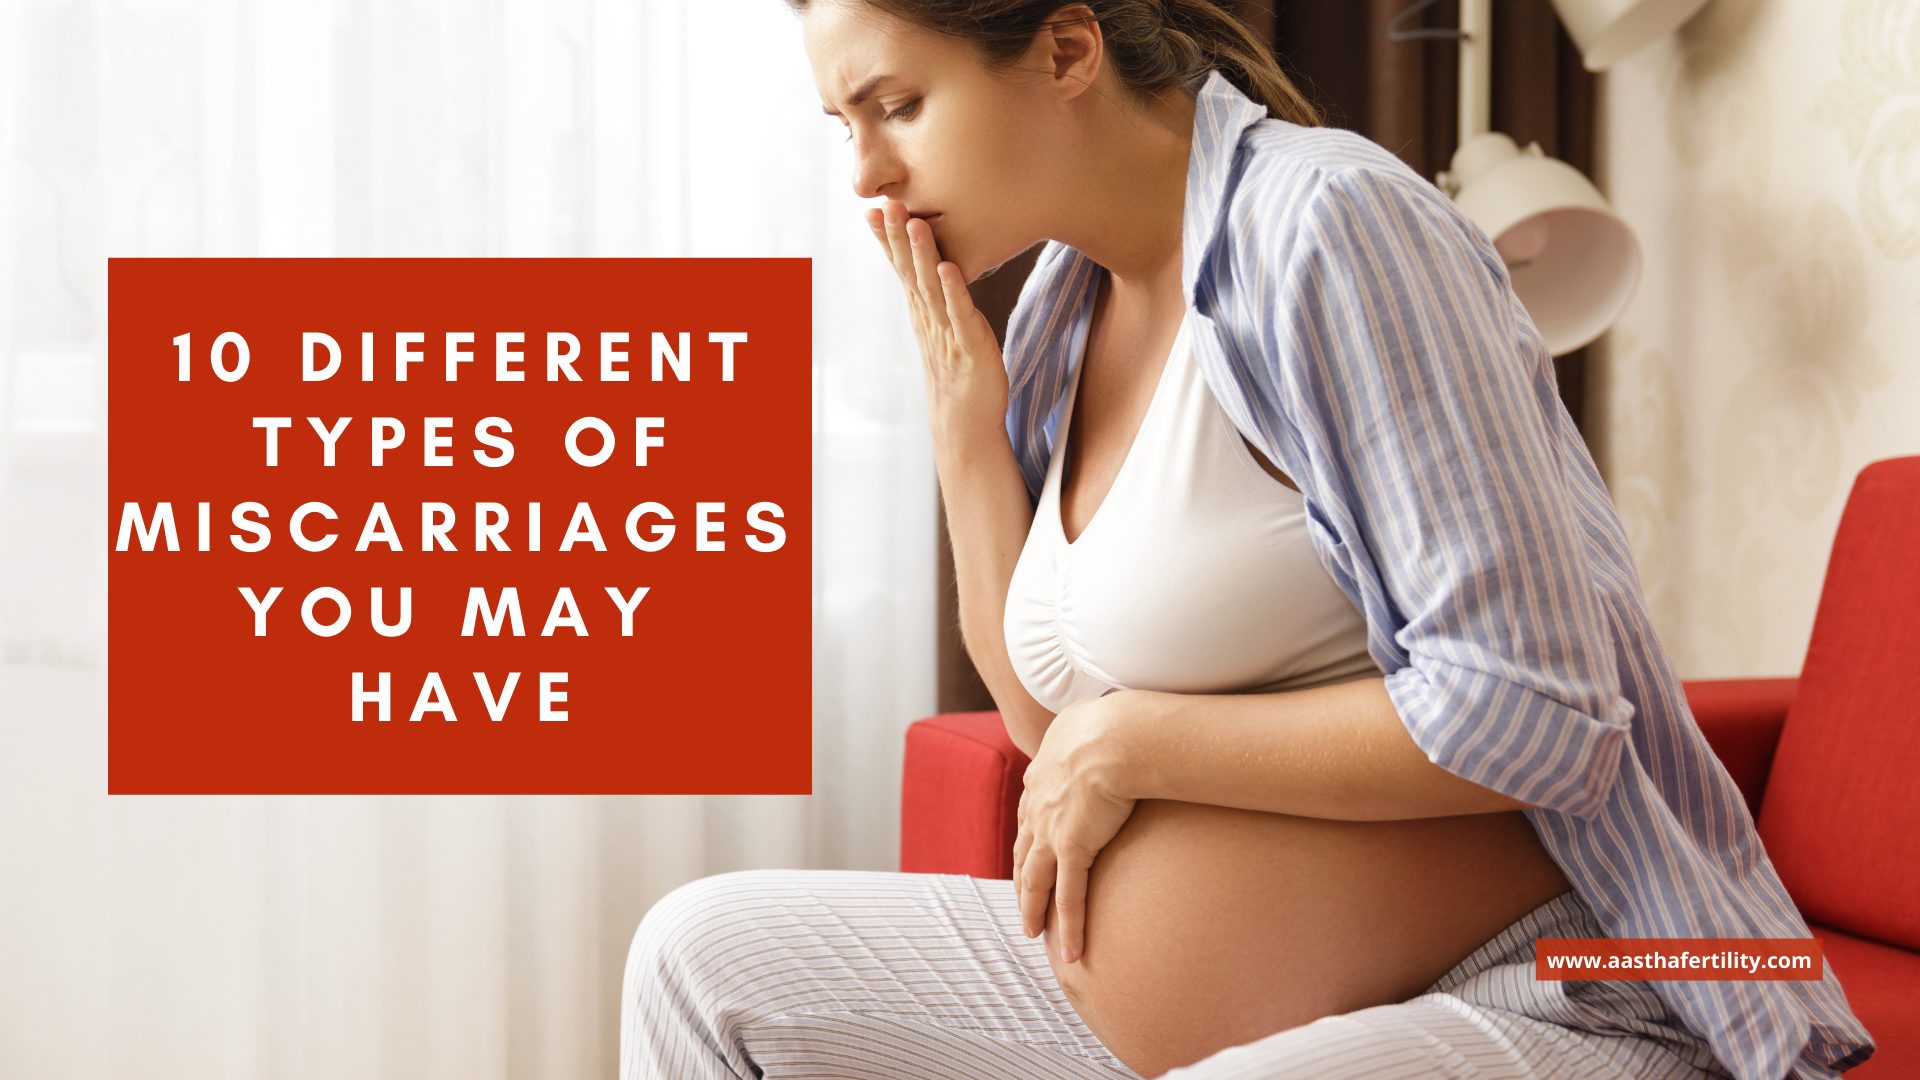 10 Different Types Of Miscarriages You May Have